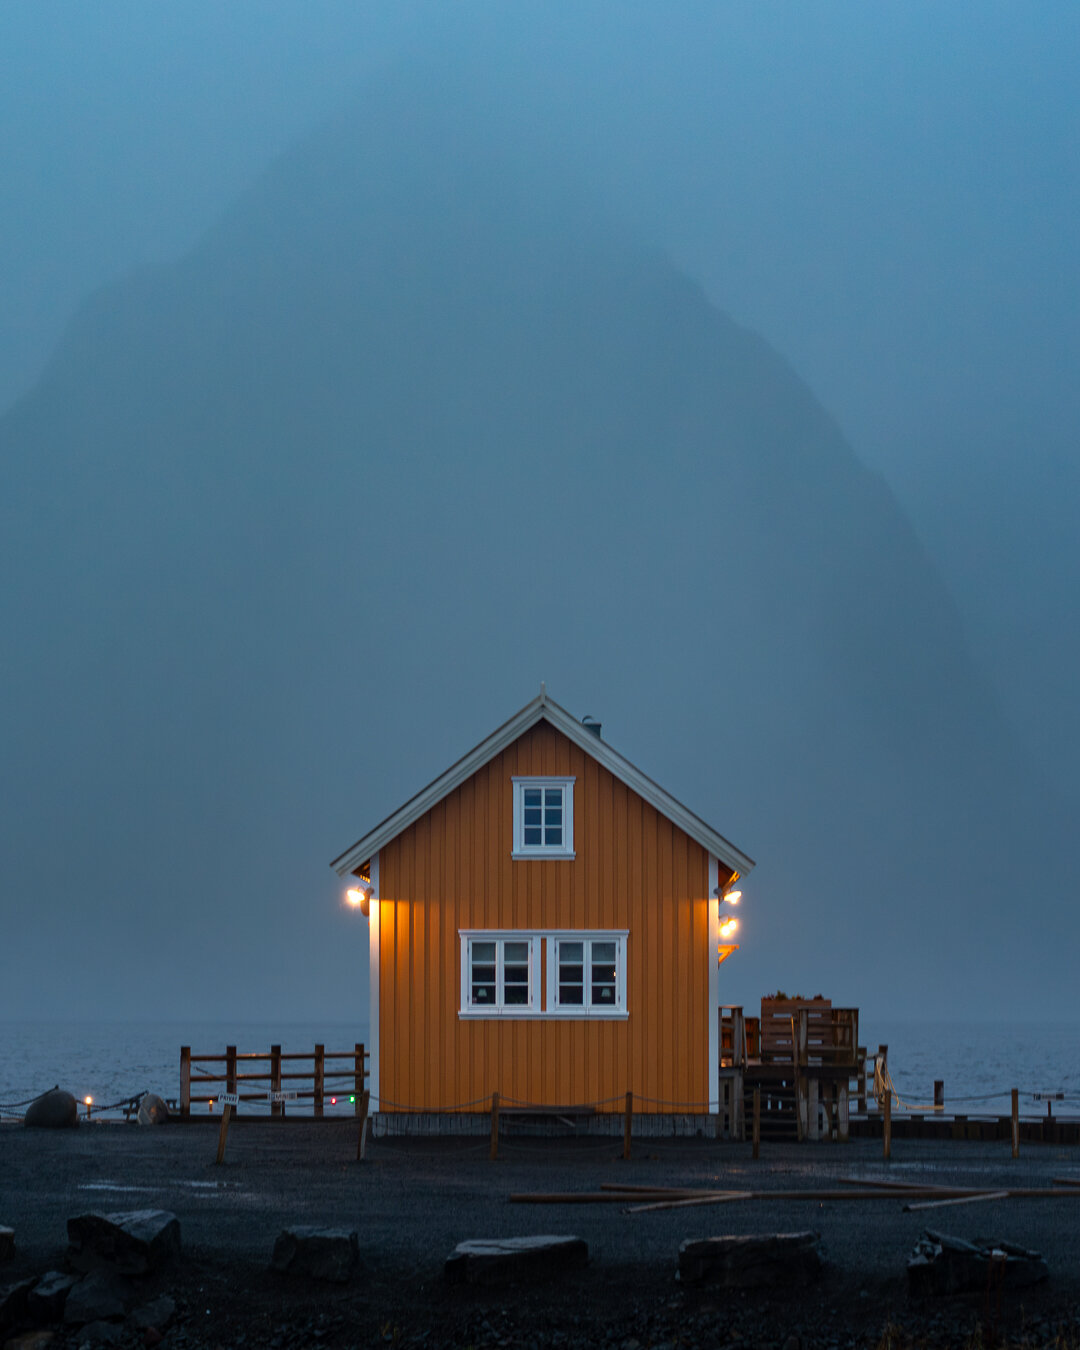 The iconic yellow cabin on a moody day.

#visitnorway #naturelovers #wanderlust #landscapephotography #arcticcircle #norge #nordlys #earthpix #instagood #adventure #explore #lofoten #beautifuldestinations #travelgram #travelblogger #tripeportugues #o